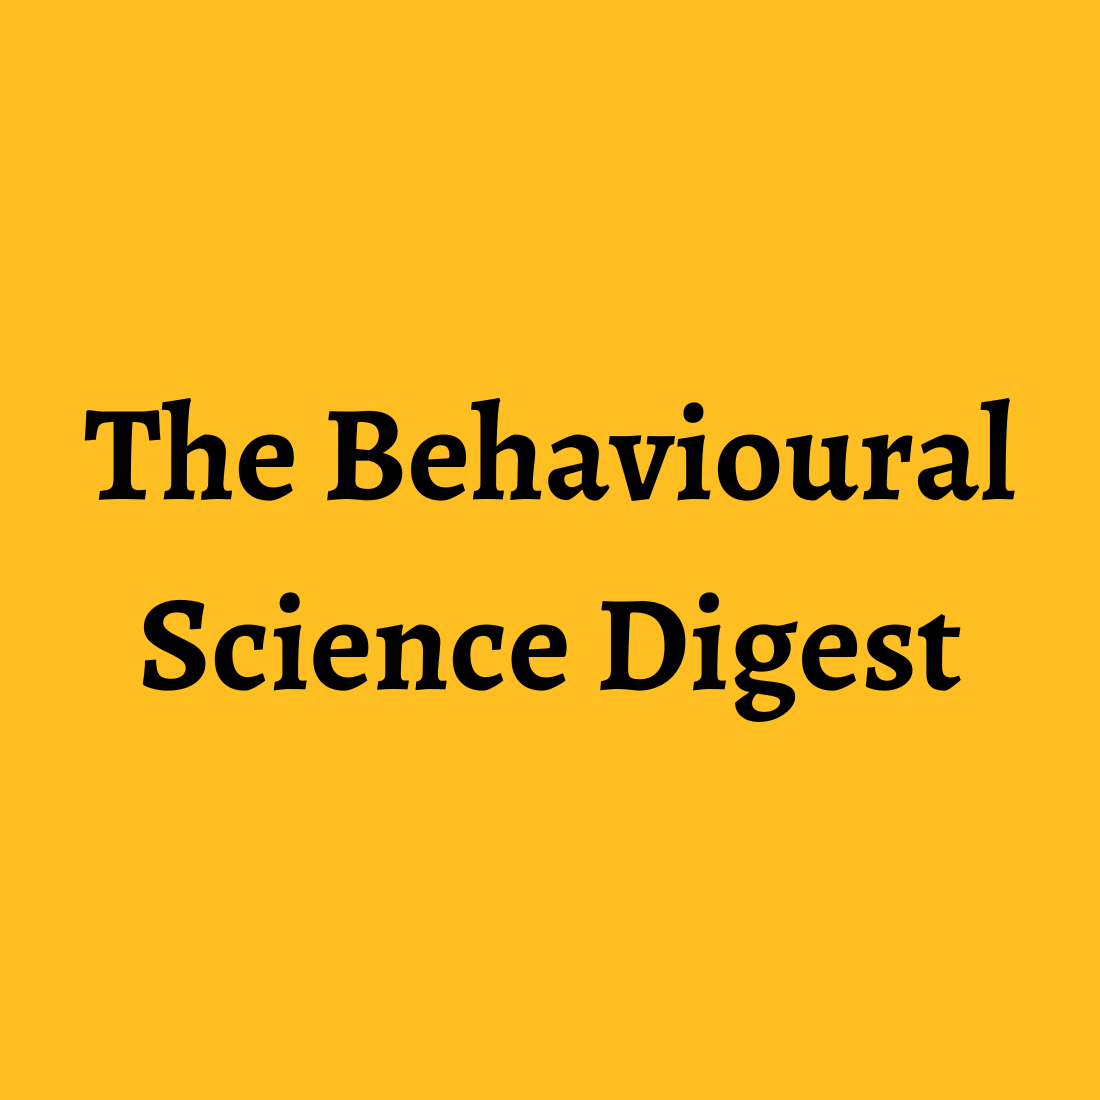 The Behavioural Science Digest